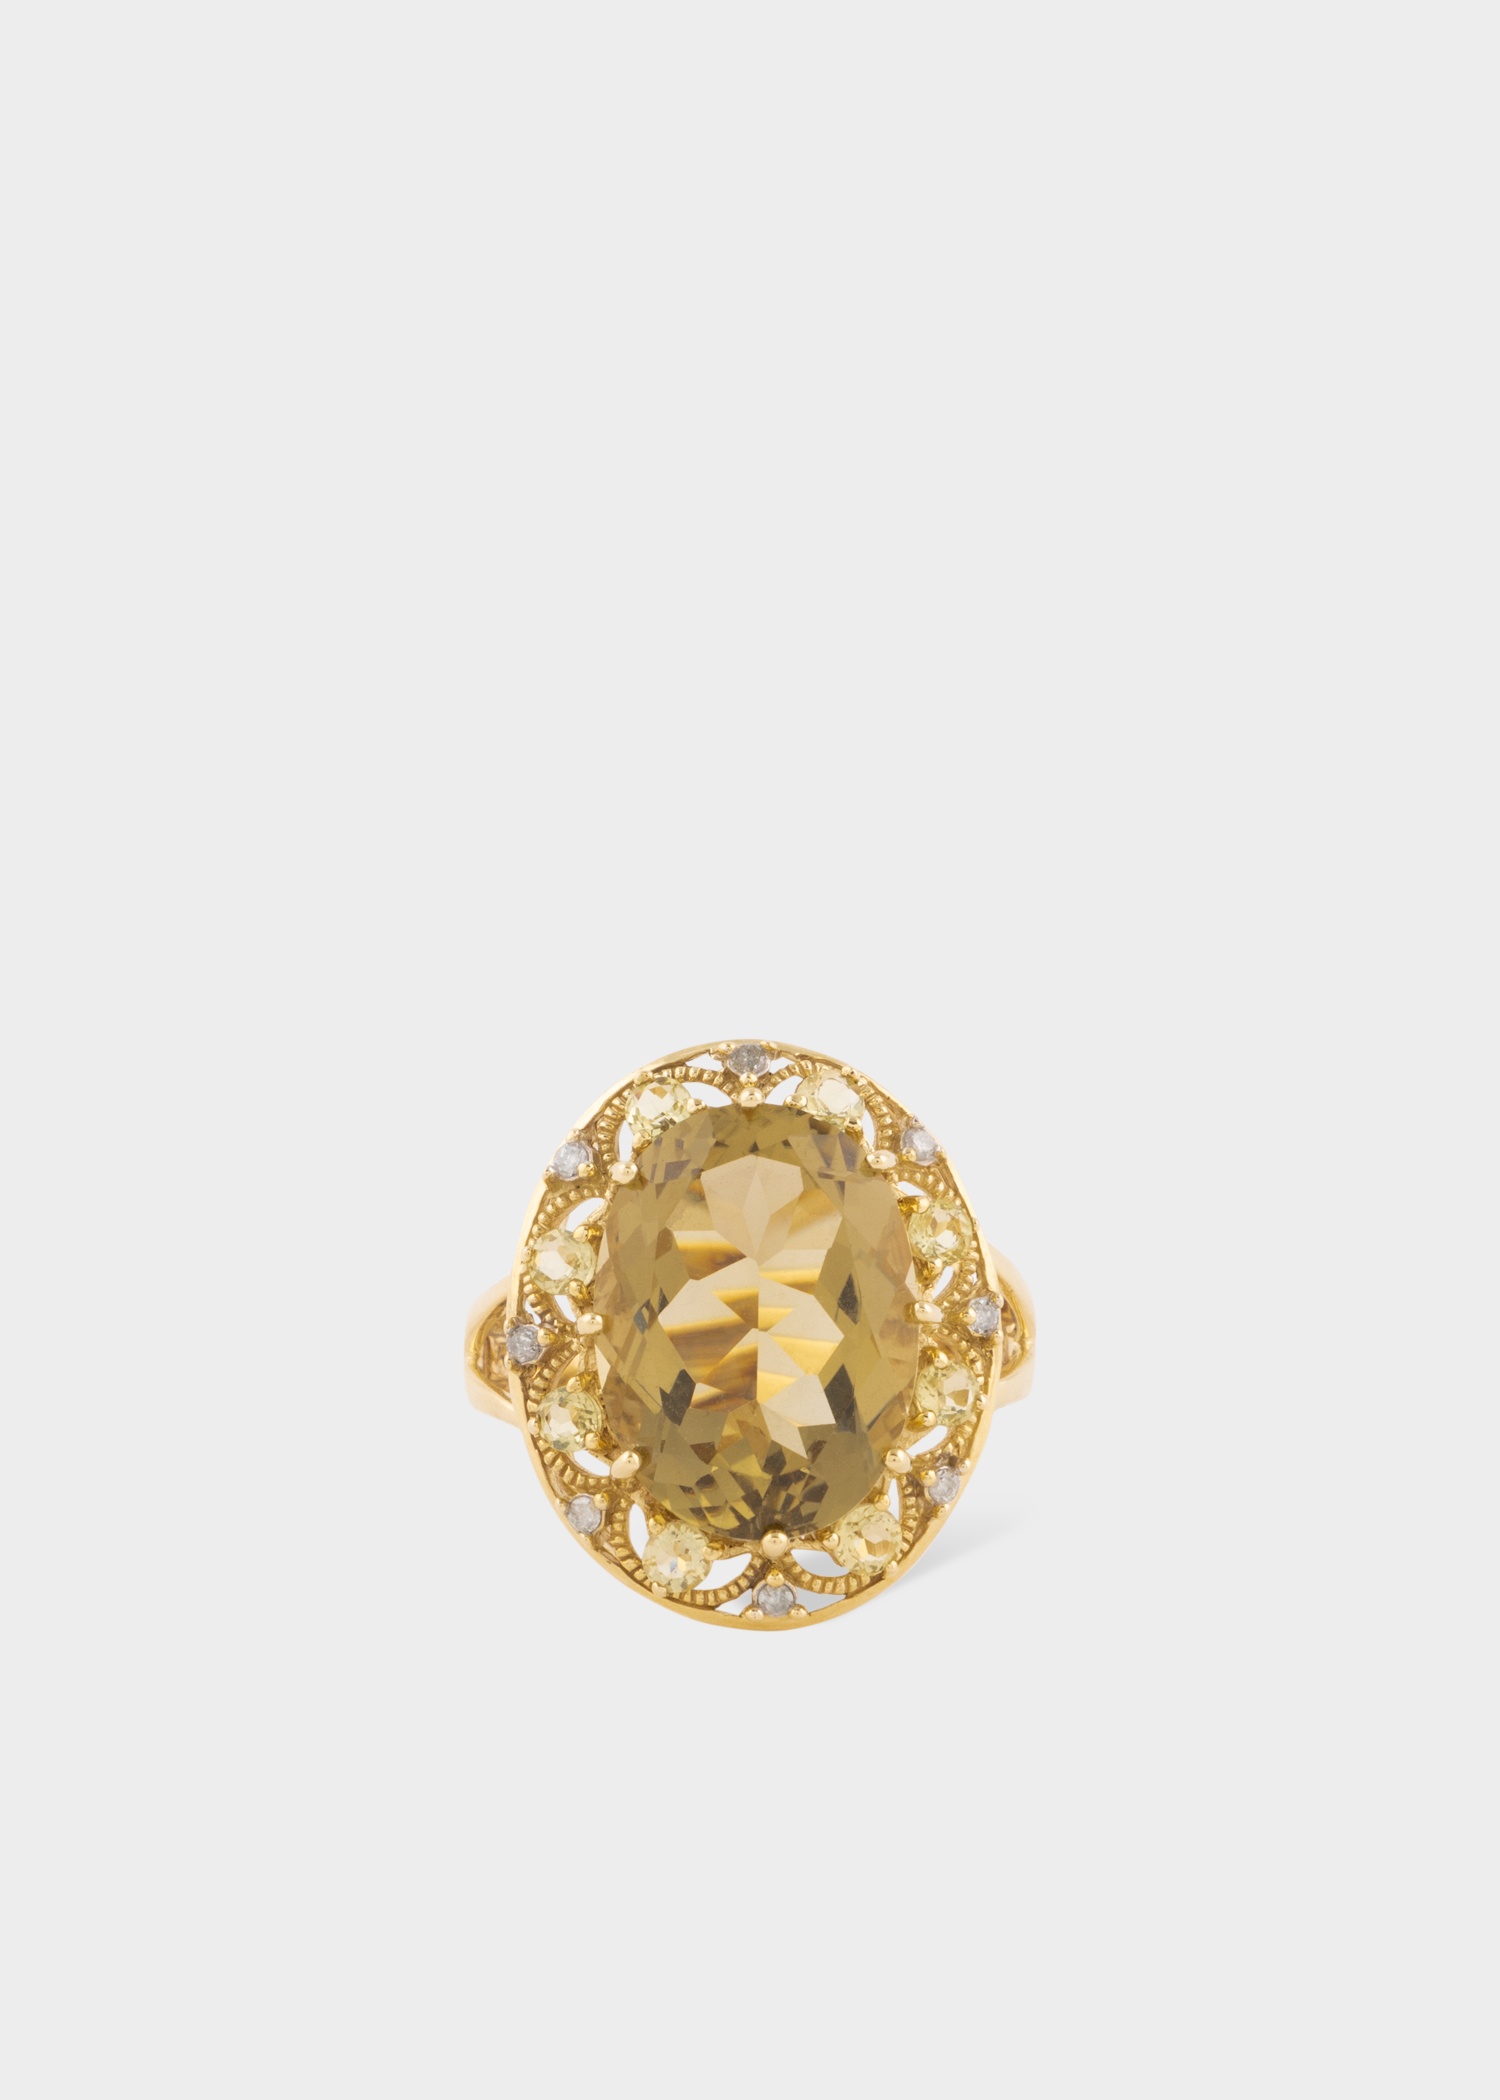 Diamond and Oro Verde Gold Cocktail Ring by Baroque Rocks - 1